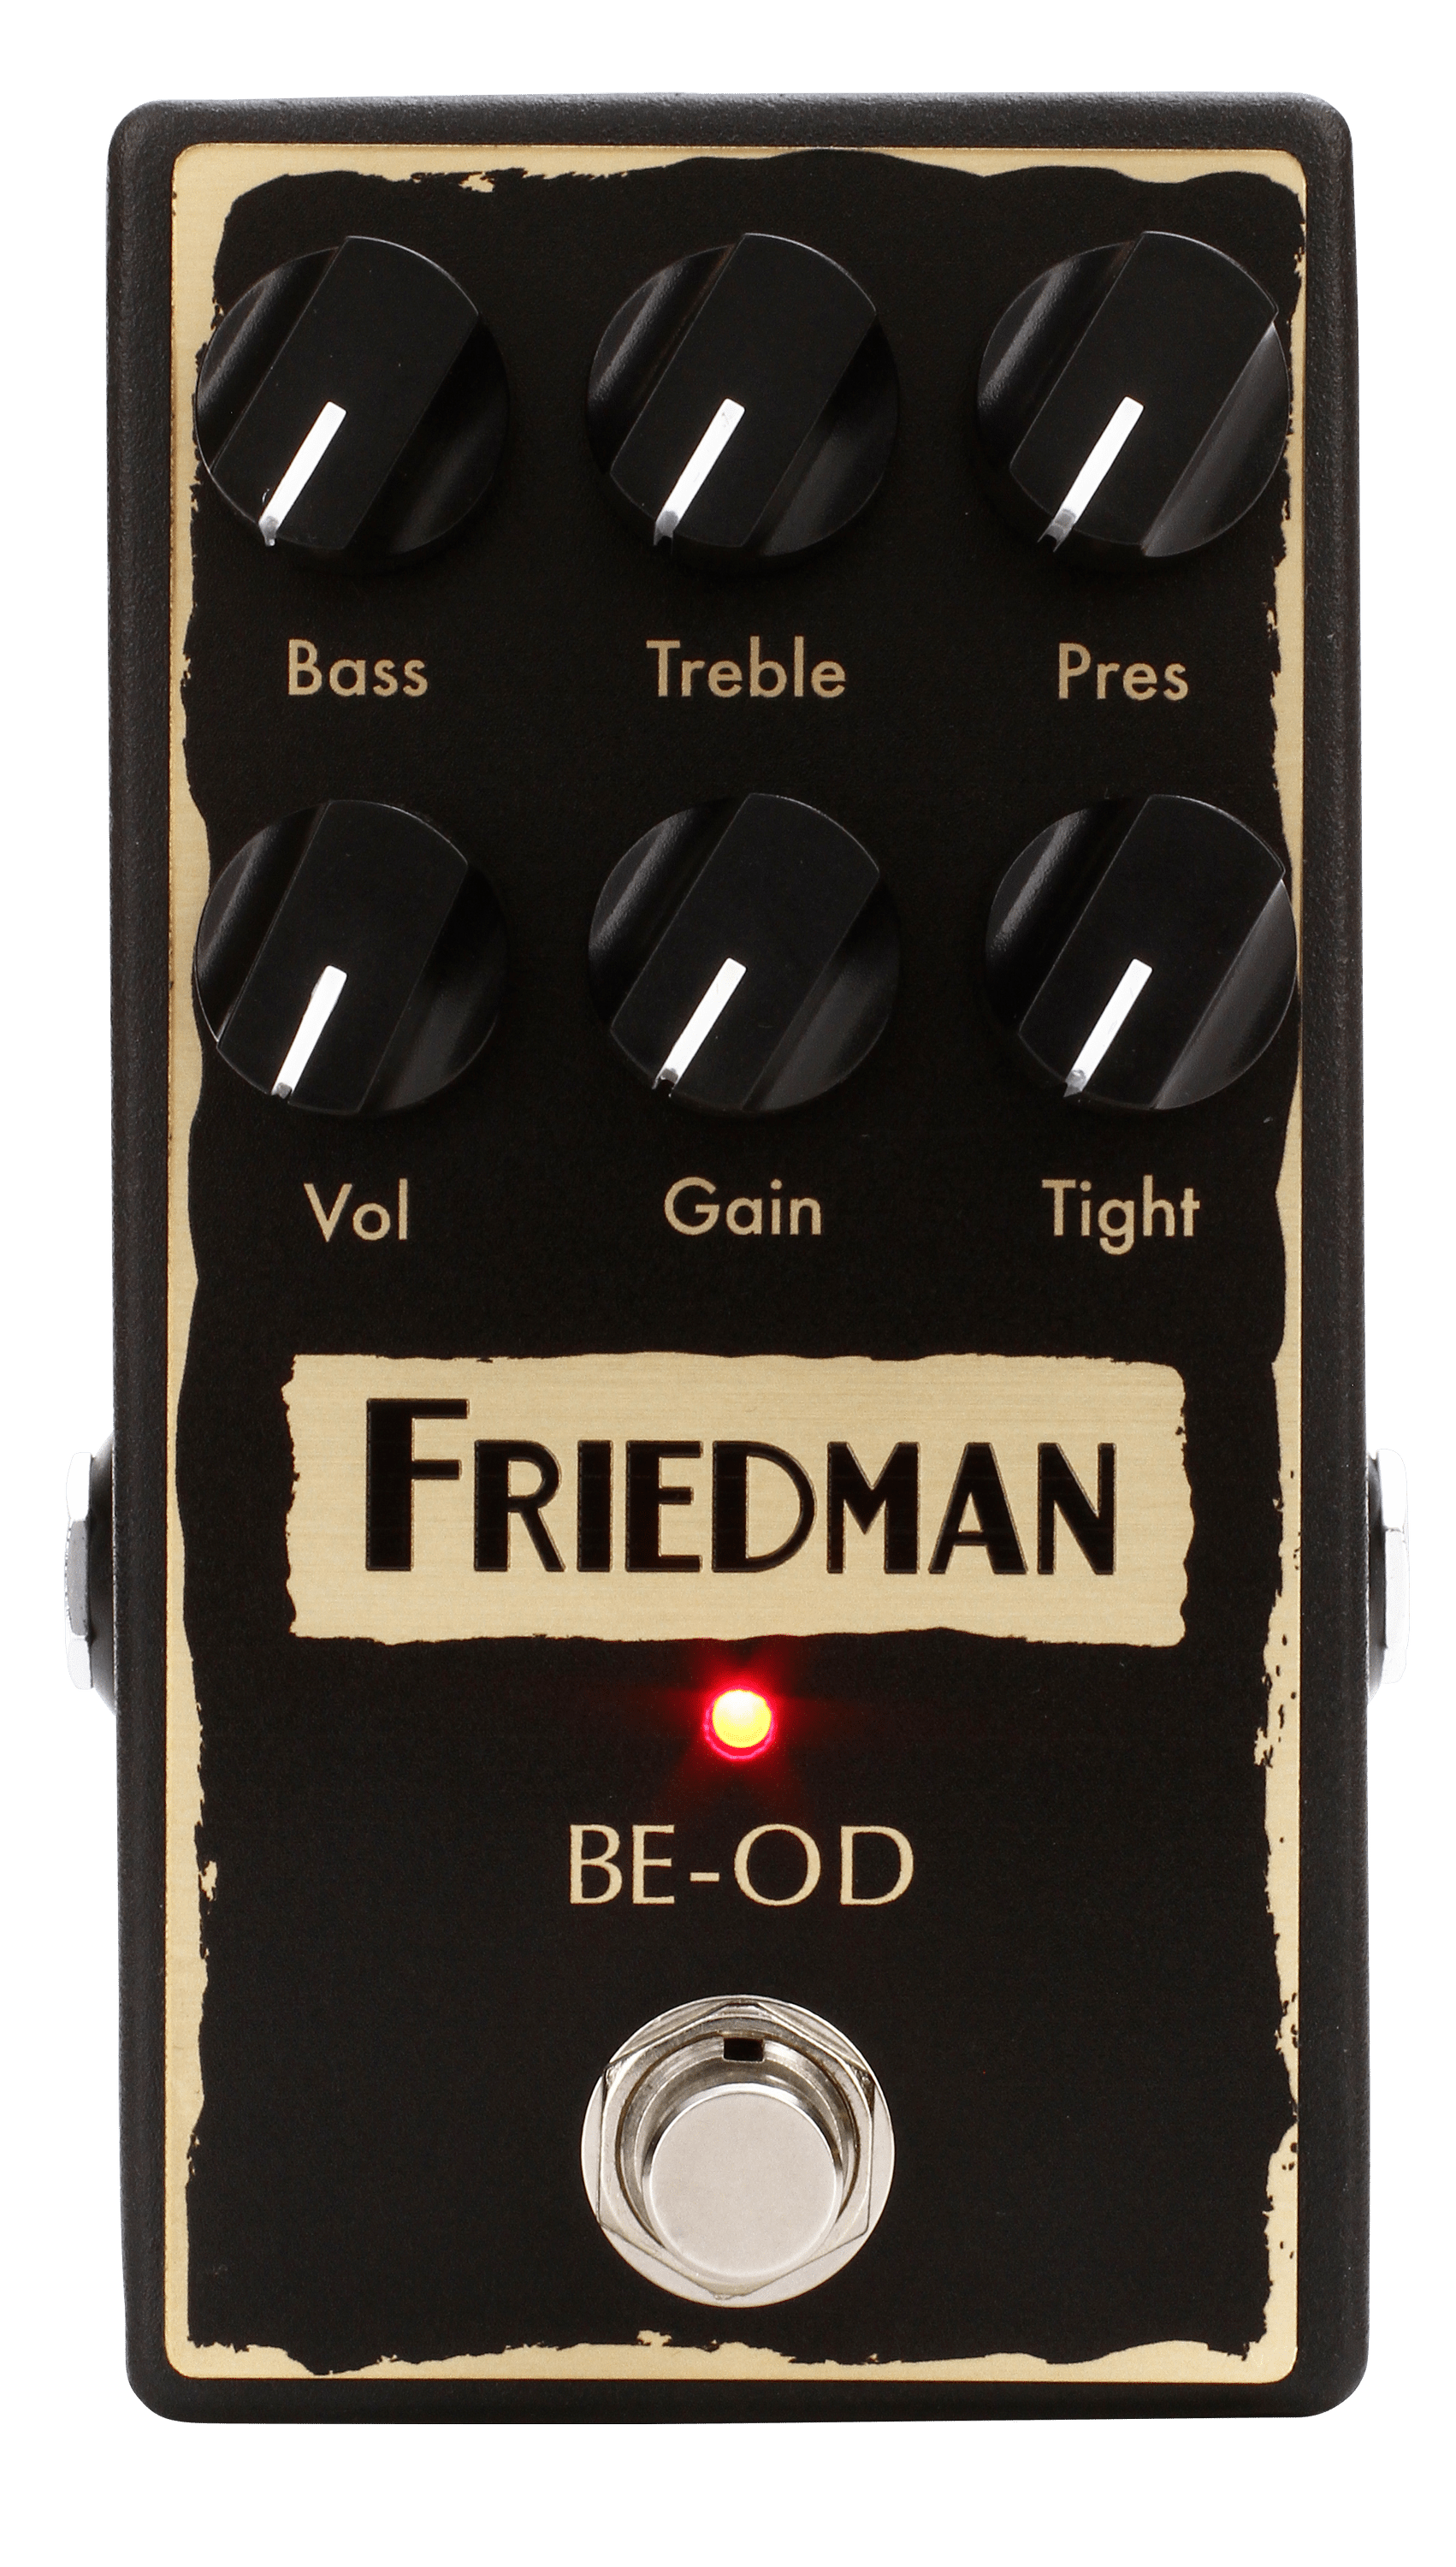 Pedal　Overdrive　BE-OD　Friedman　Sweetwater